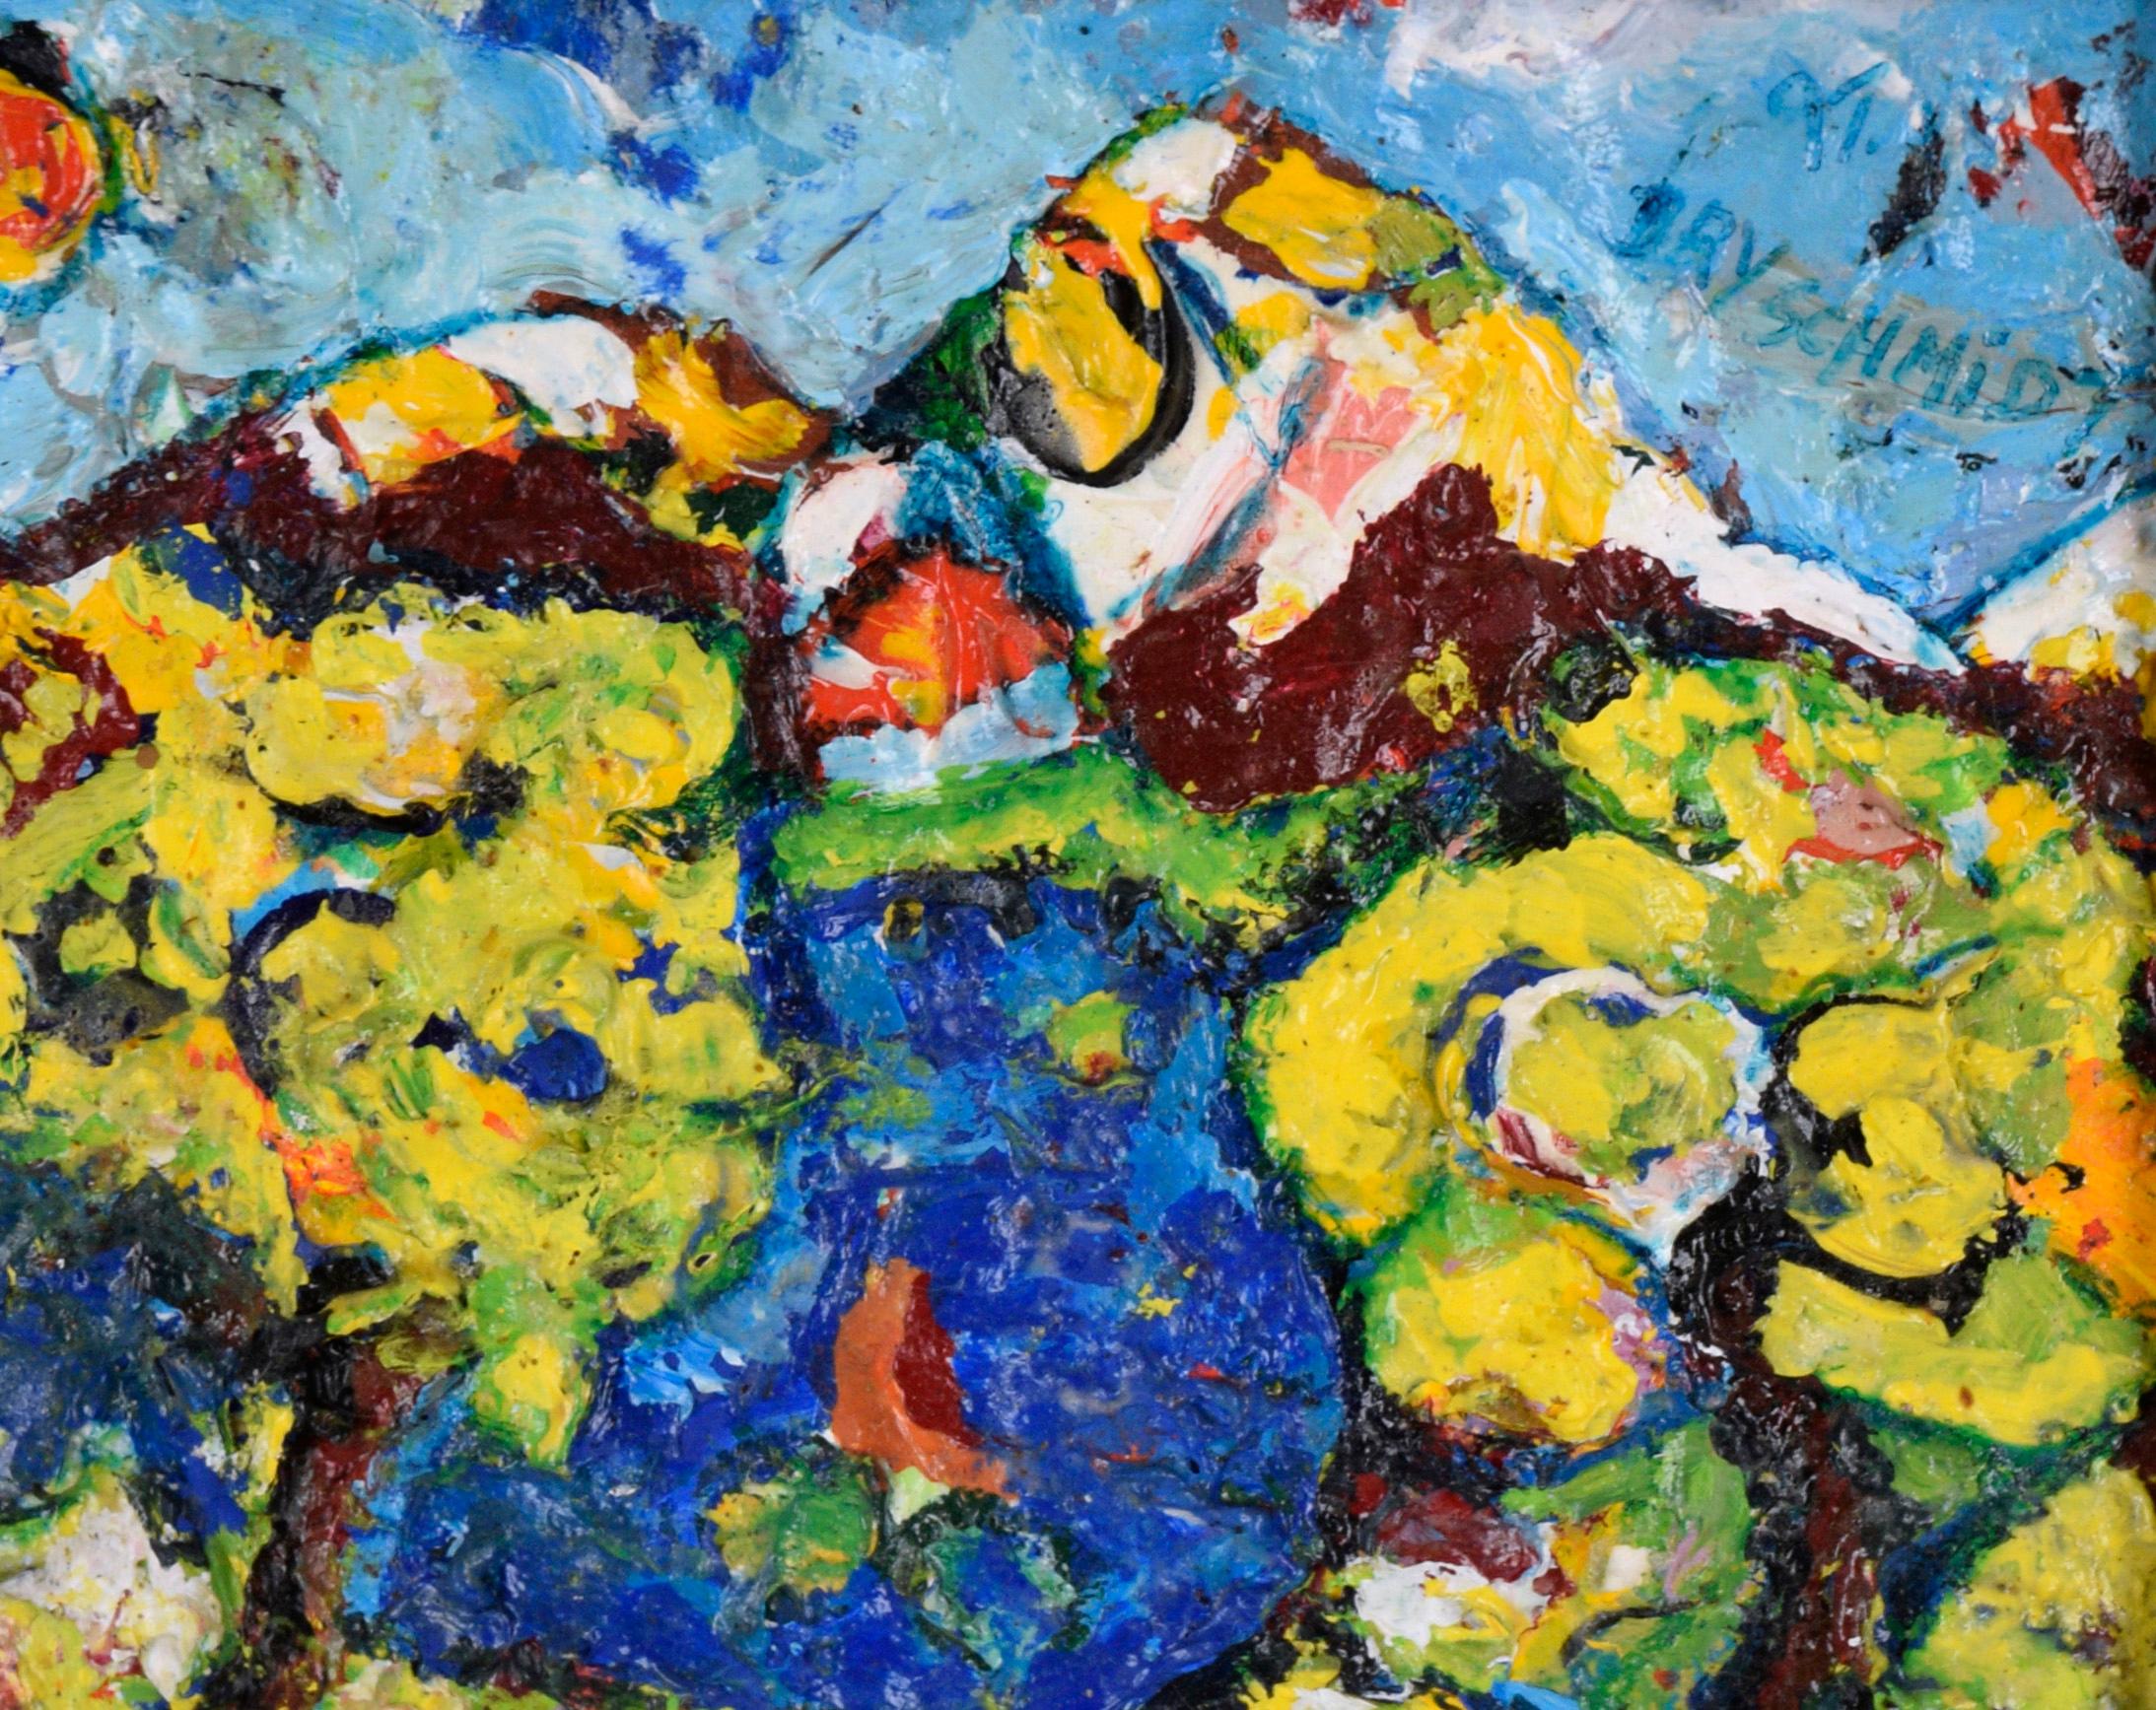 Fauvist Landscape with Lake and Mountains in Oil on Paper

Bright and textured landscape by unknown artist Bry Schmidt (20th Century). This piece shows a whimsical landscape, with a lake surround by trees and mountains in the distance. This piece